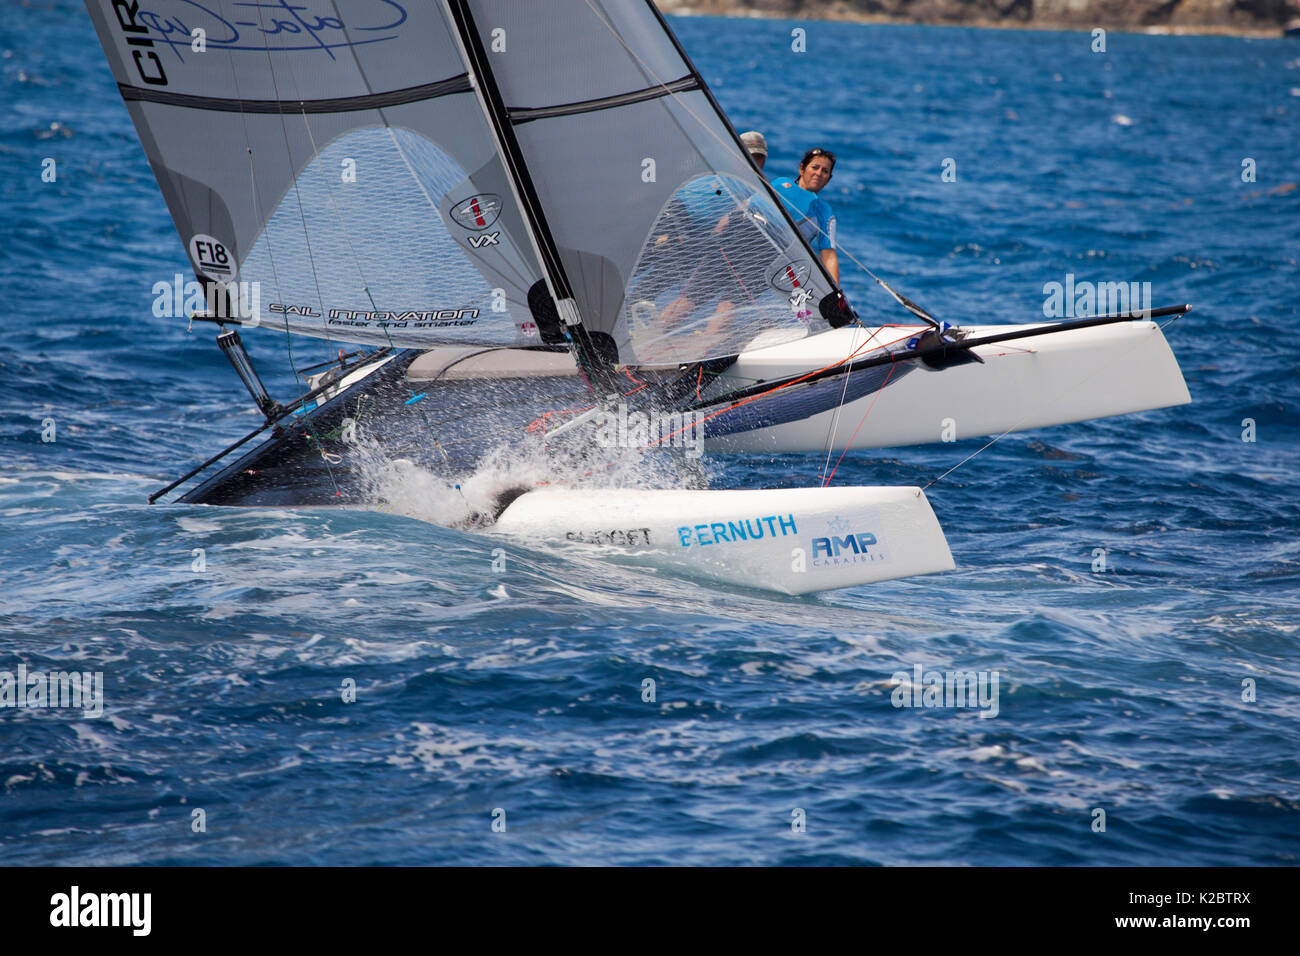 Catamaran heeling during sailors in St. Barths, West Indies, March 2012. Stock Photo